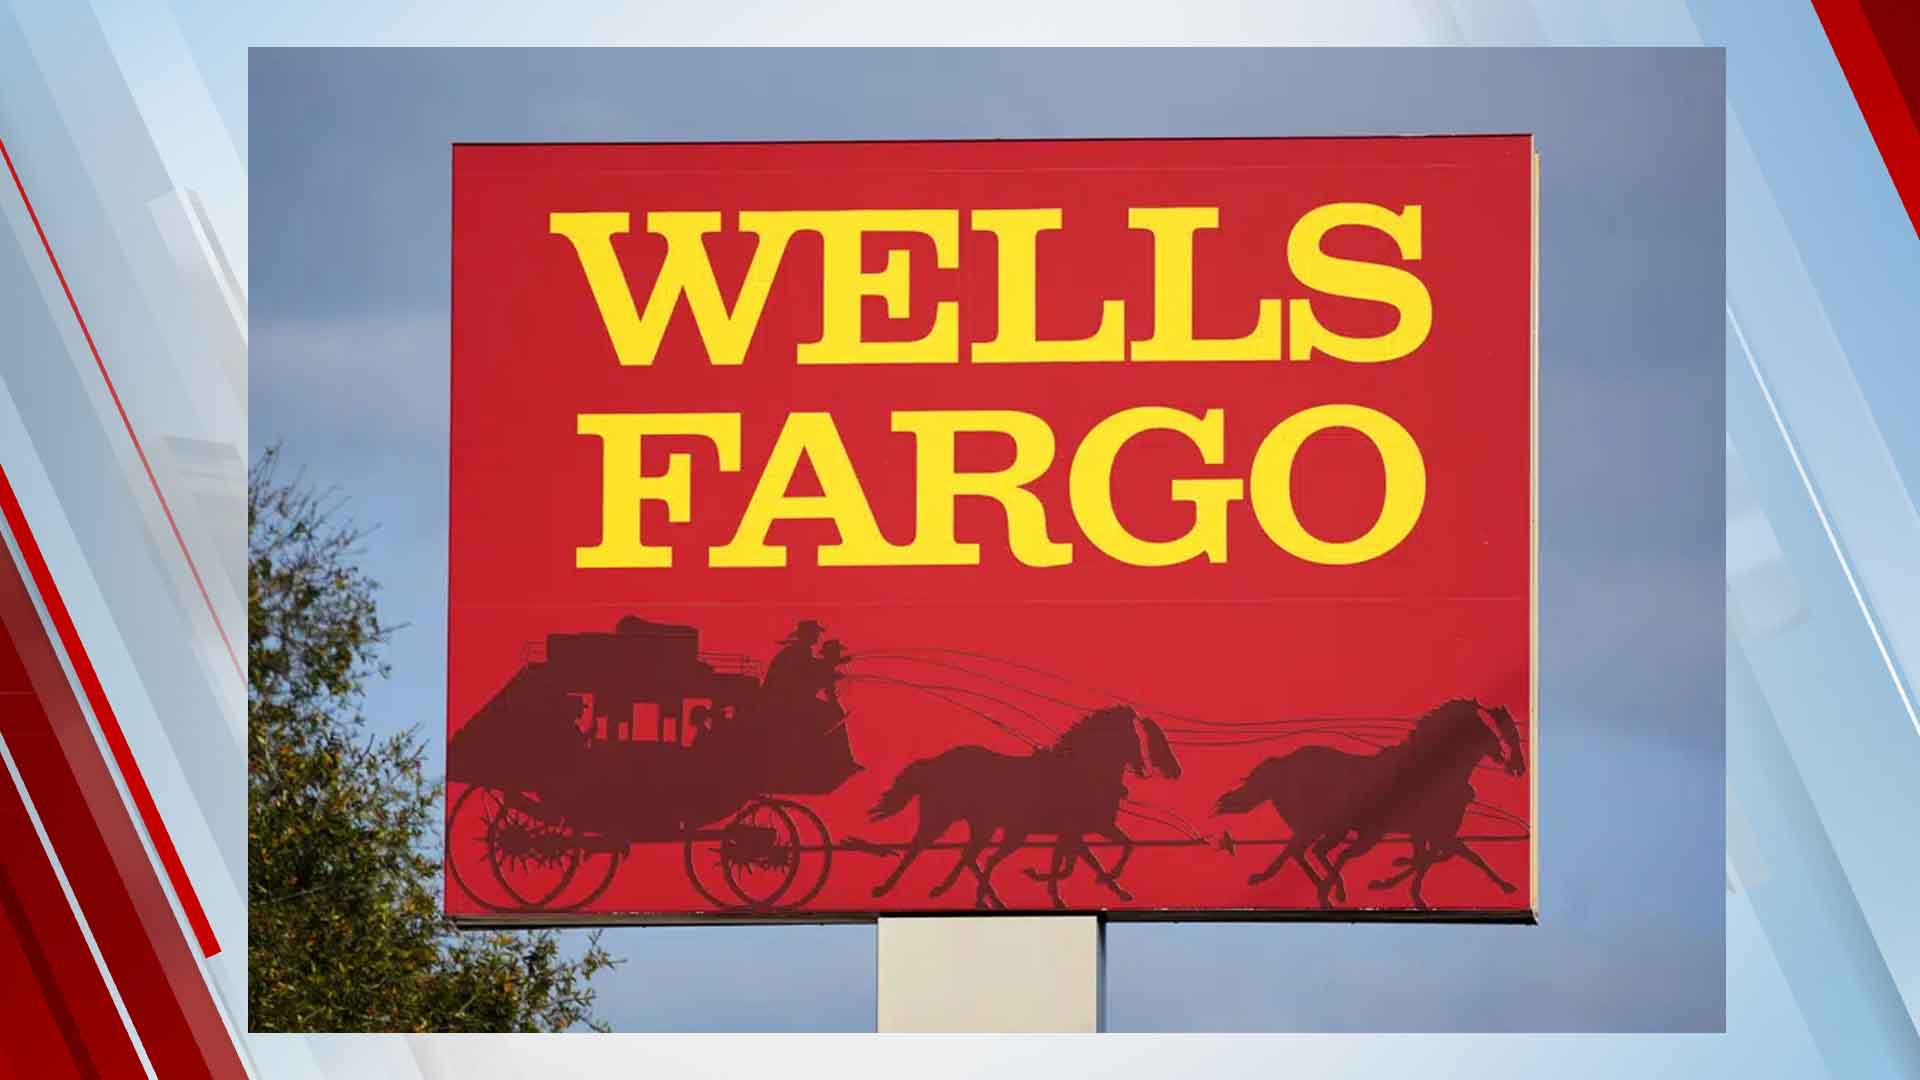 Wells Fargo To Pay $3.7B Over Consumer Law Violations